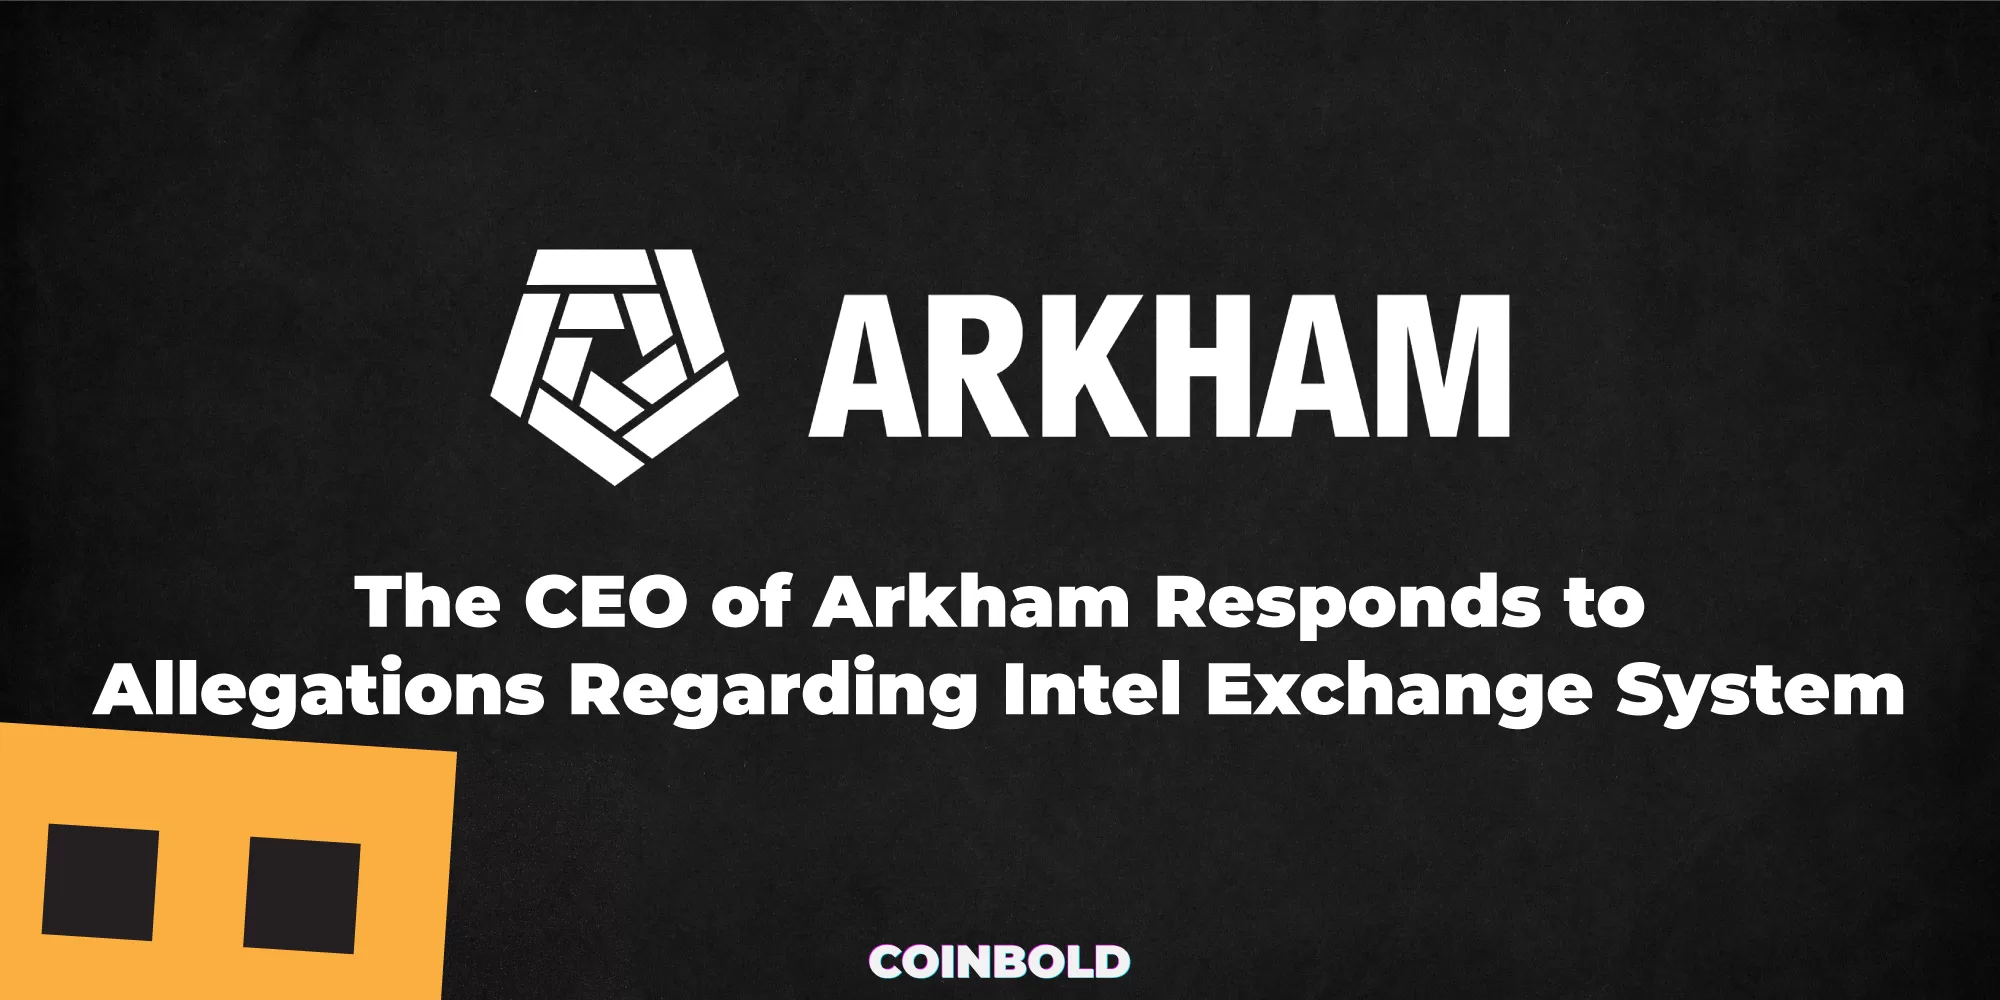 The CEO of Arkham Responds to Allegations Regarding Intel Exchange System